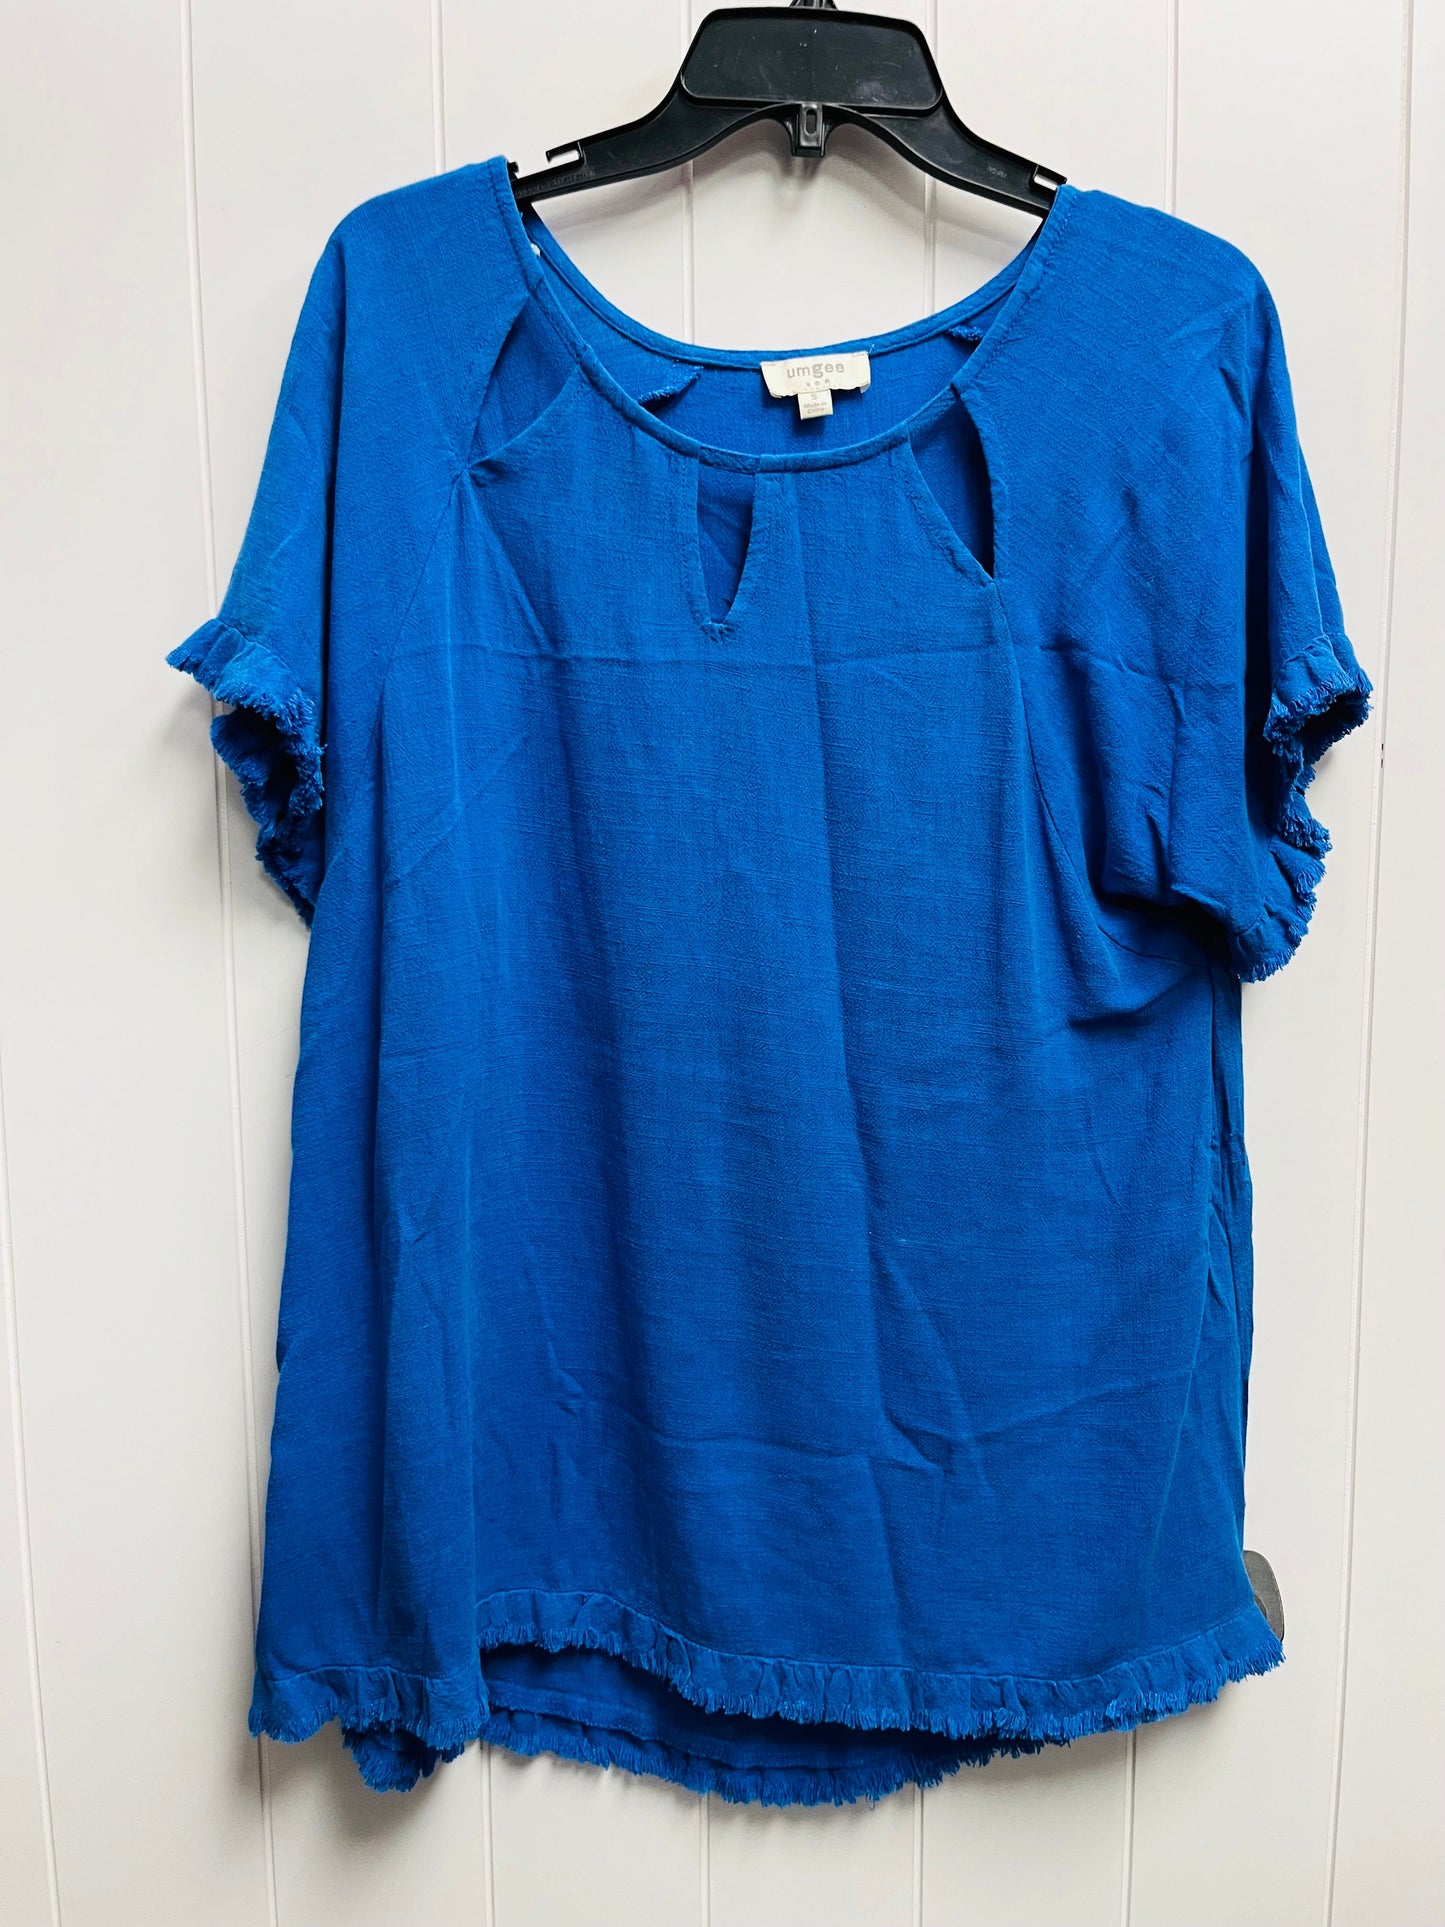 Blue Top Short Sleeve Umgee, Size S